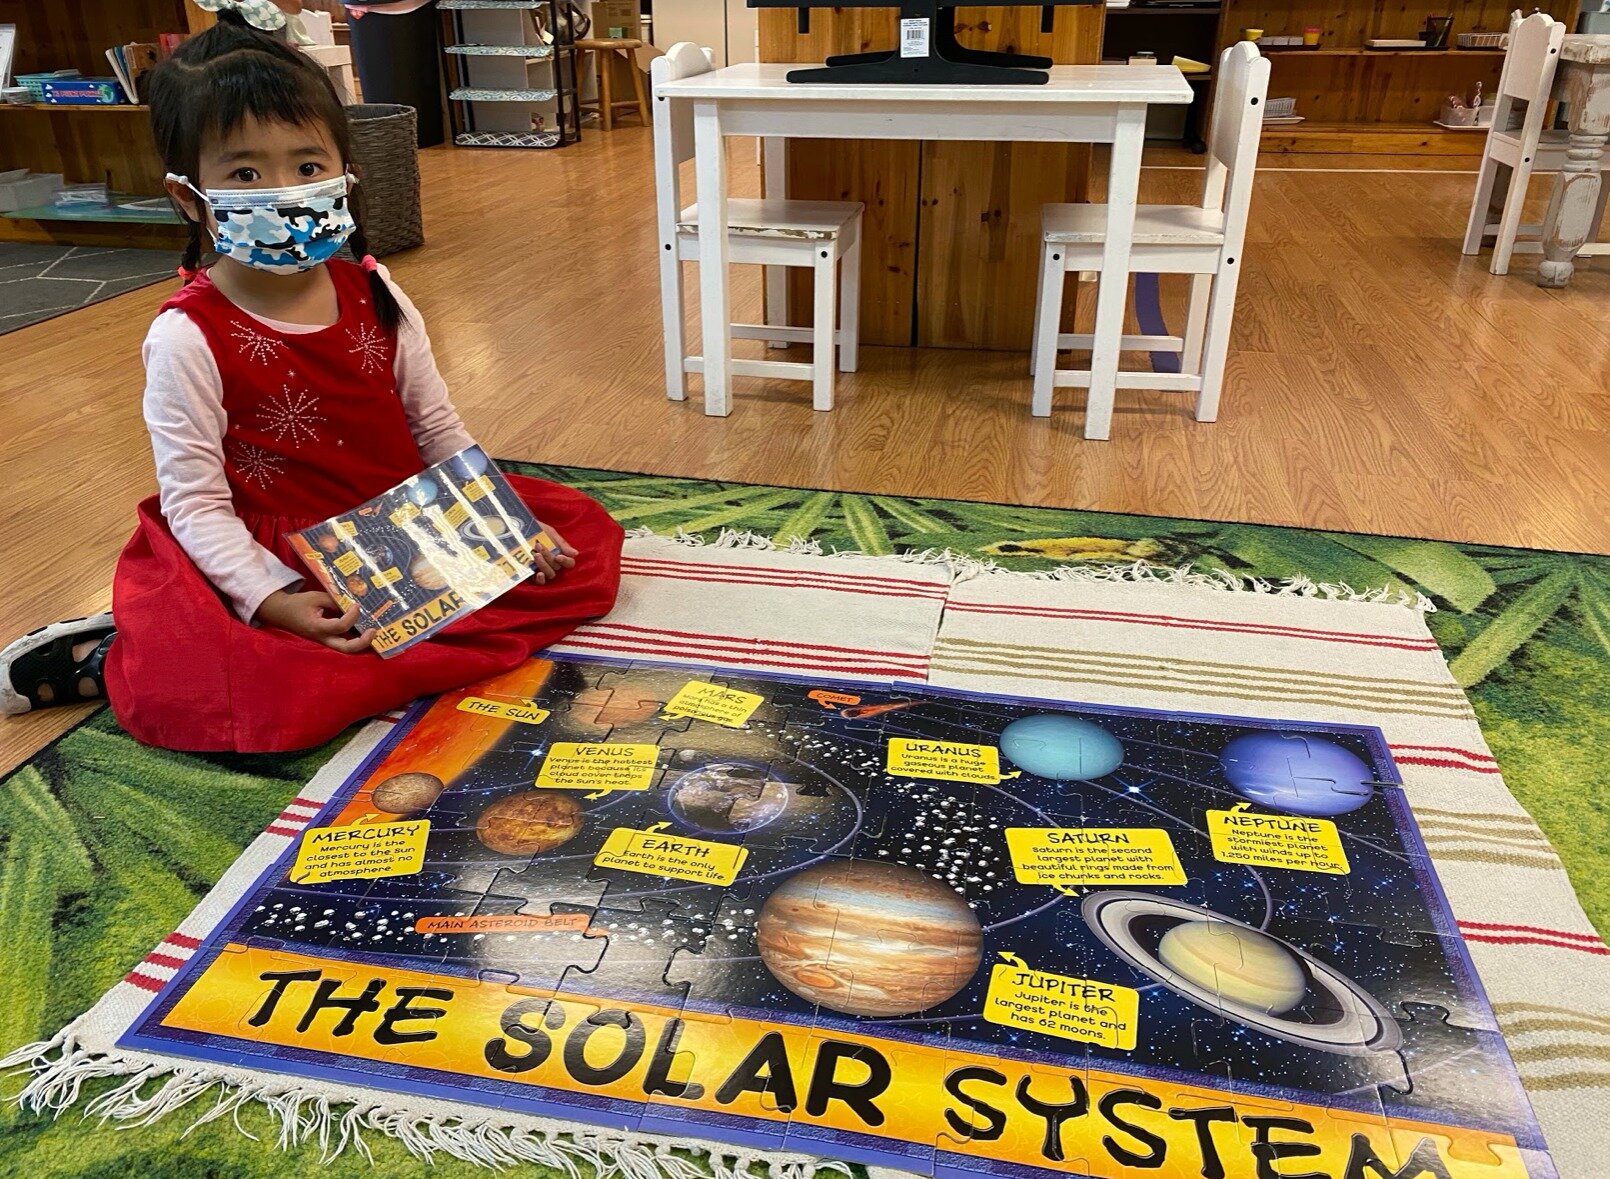 We love educational puzzles! Students practice problem-solving, pattern recognition, and sorting. This solar system puzzle is a great way for children to independently review the planets after our lesson.

#solarsystem #problemsolvingskill #montessor